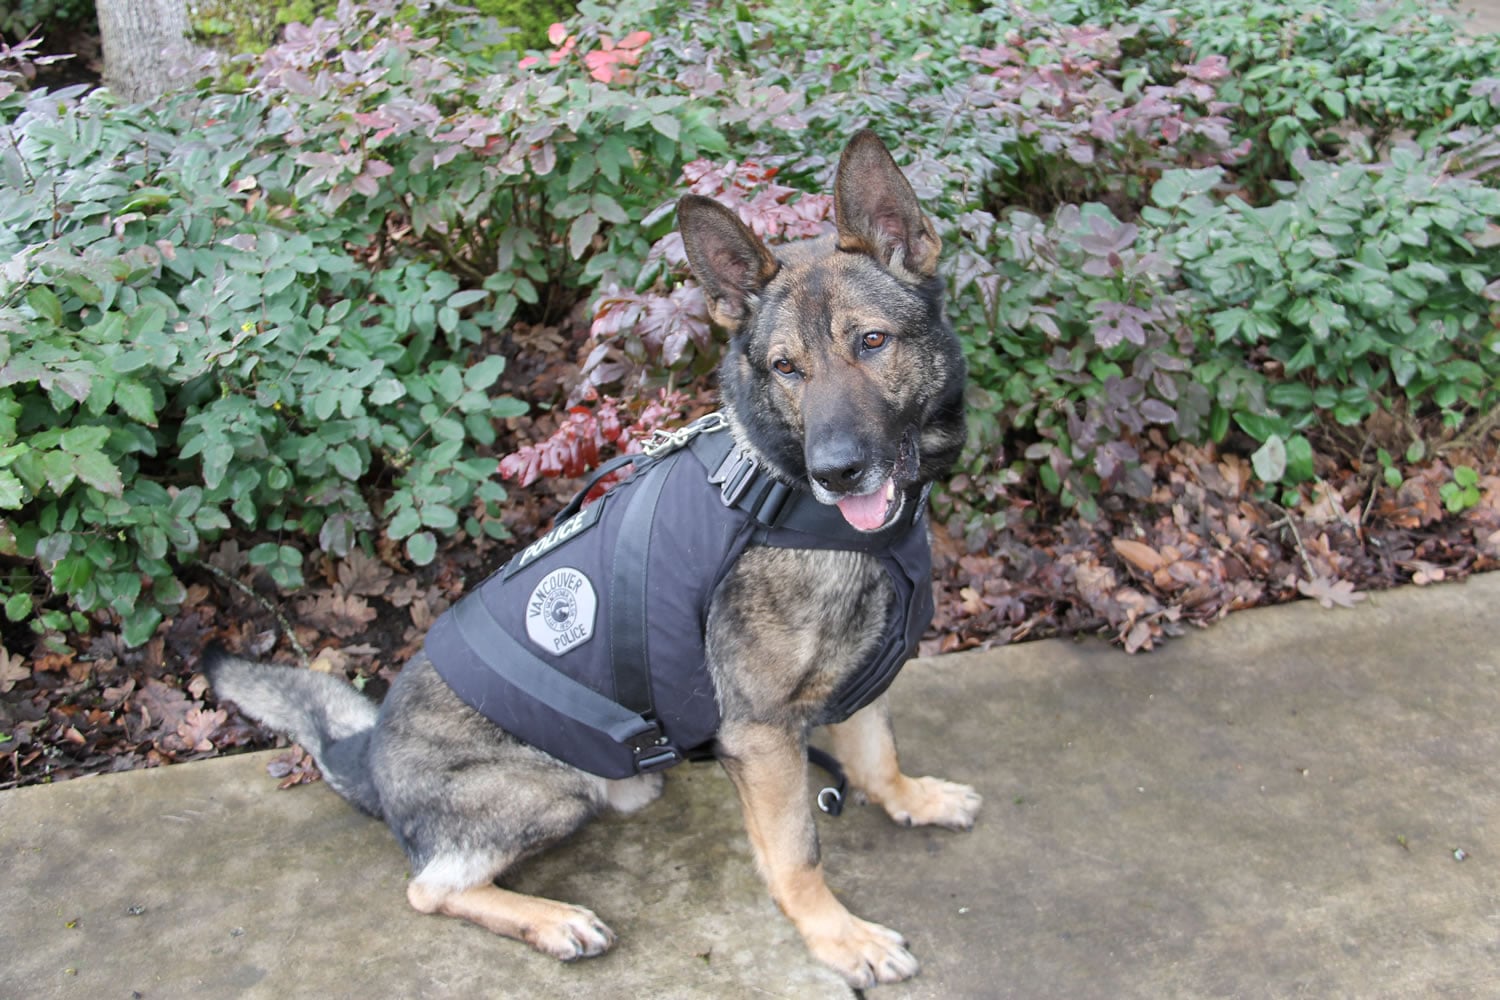 Vancouver Police K9 Enzo received a bullet and stab protective vest this week. The vest was a donation by a Georgia nonprofit Canine Wounded Heroes.